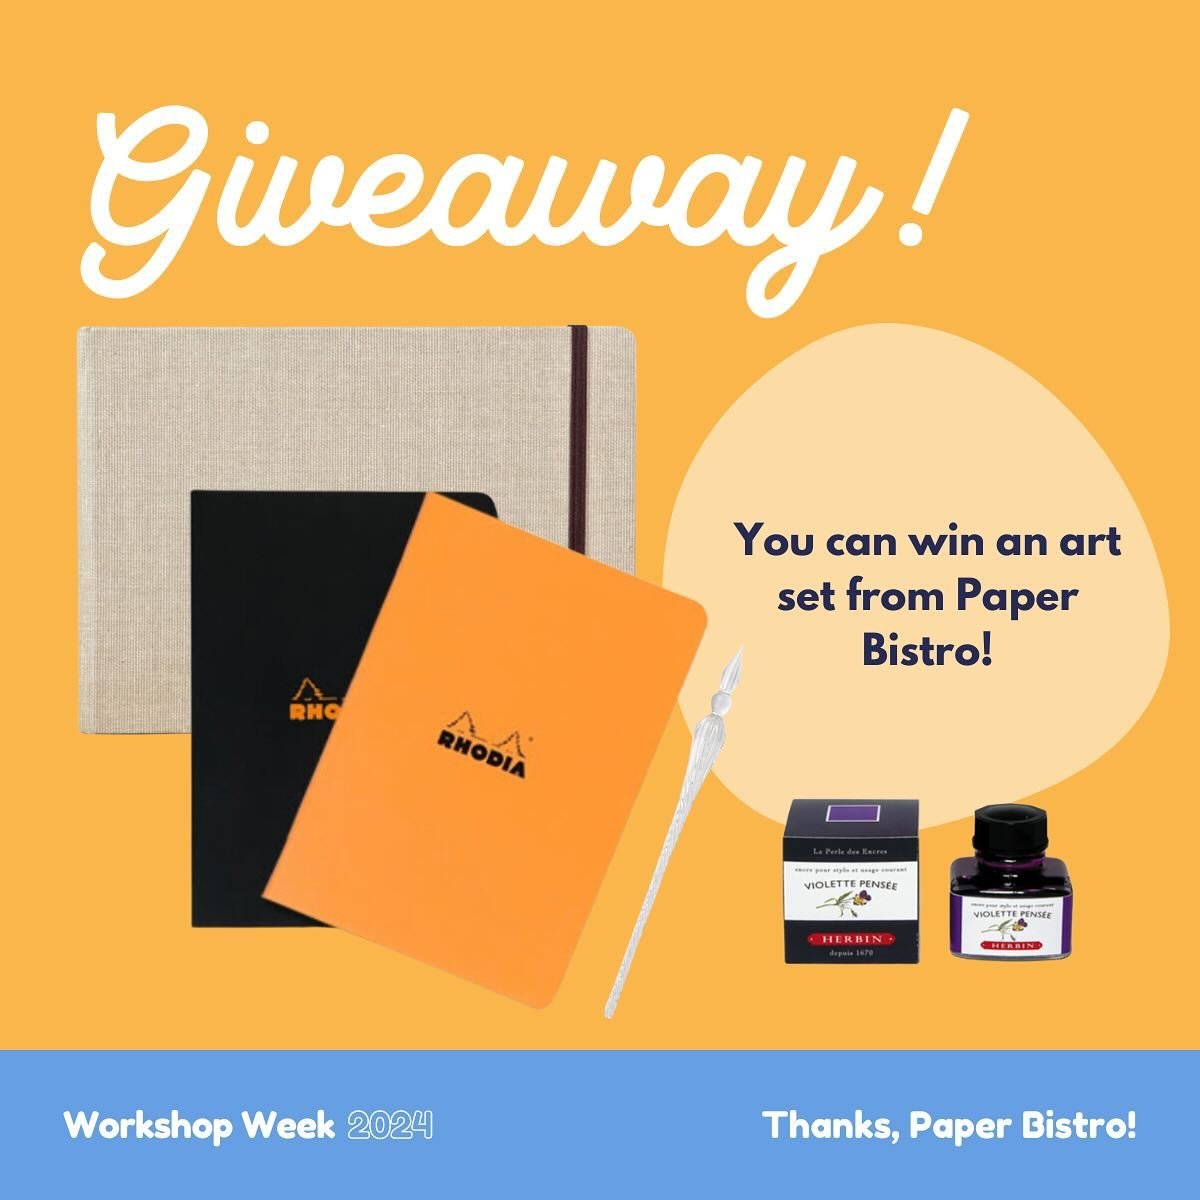 We have sooo many amazing giveaway items for you this year at Workshop Week! Like this one from Paper Bistro ... how awesome would it be to win this?!

&ldquo;How do I win?&rdquo;, you ask?

The rules are simple (and, dare we say, nonexistent 😉)

Al